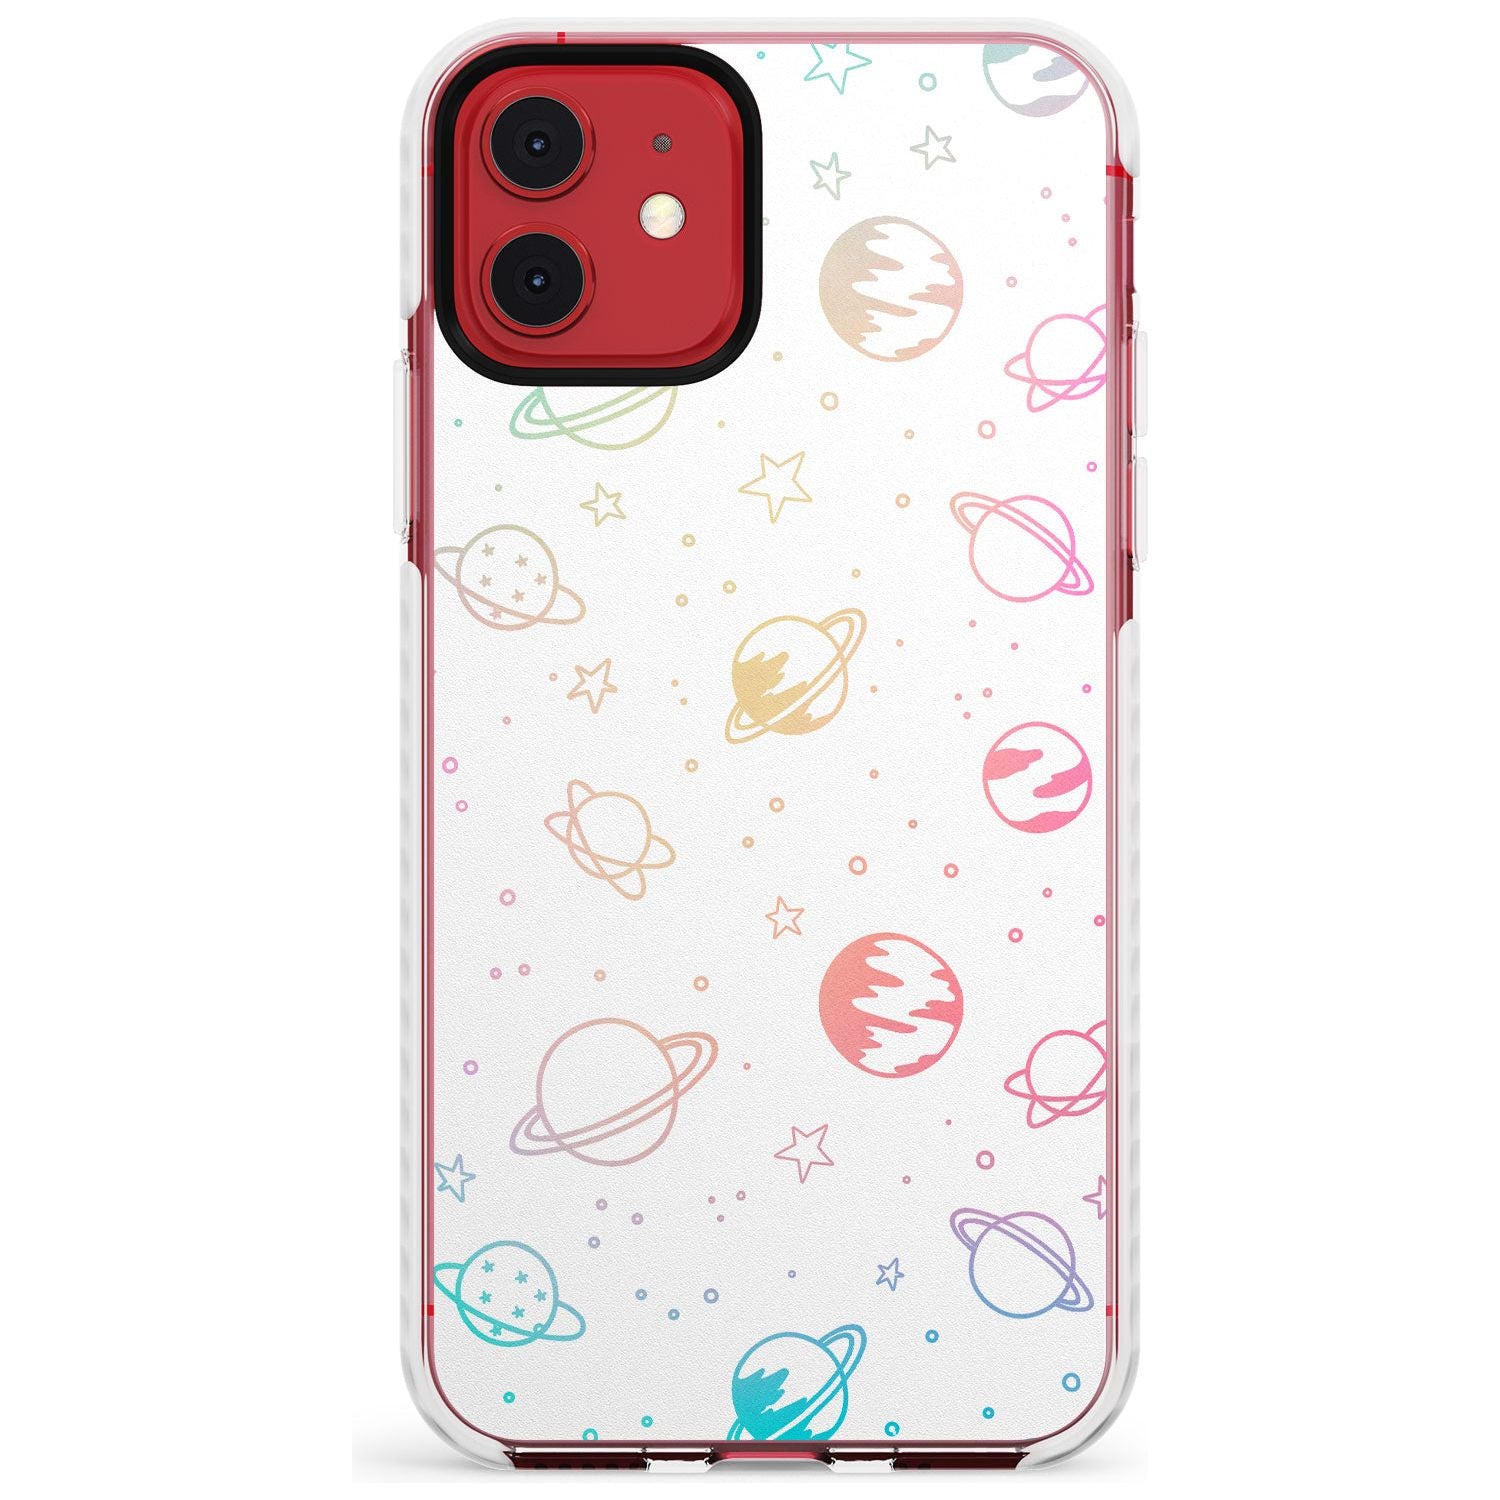 Outer Space Outlines: Pastels on White Slim TPU Phone Case for iPhone 11